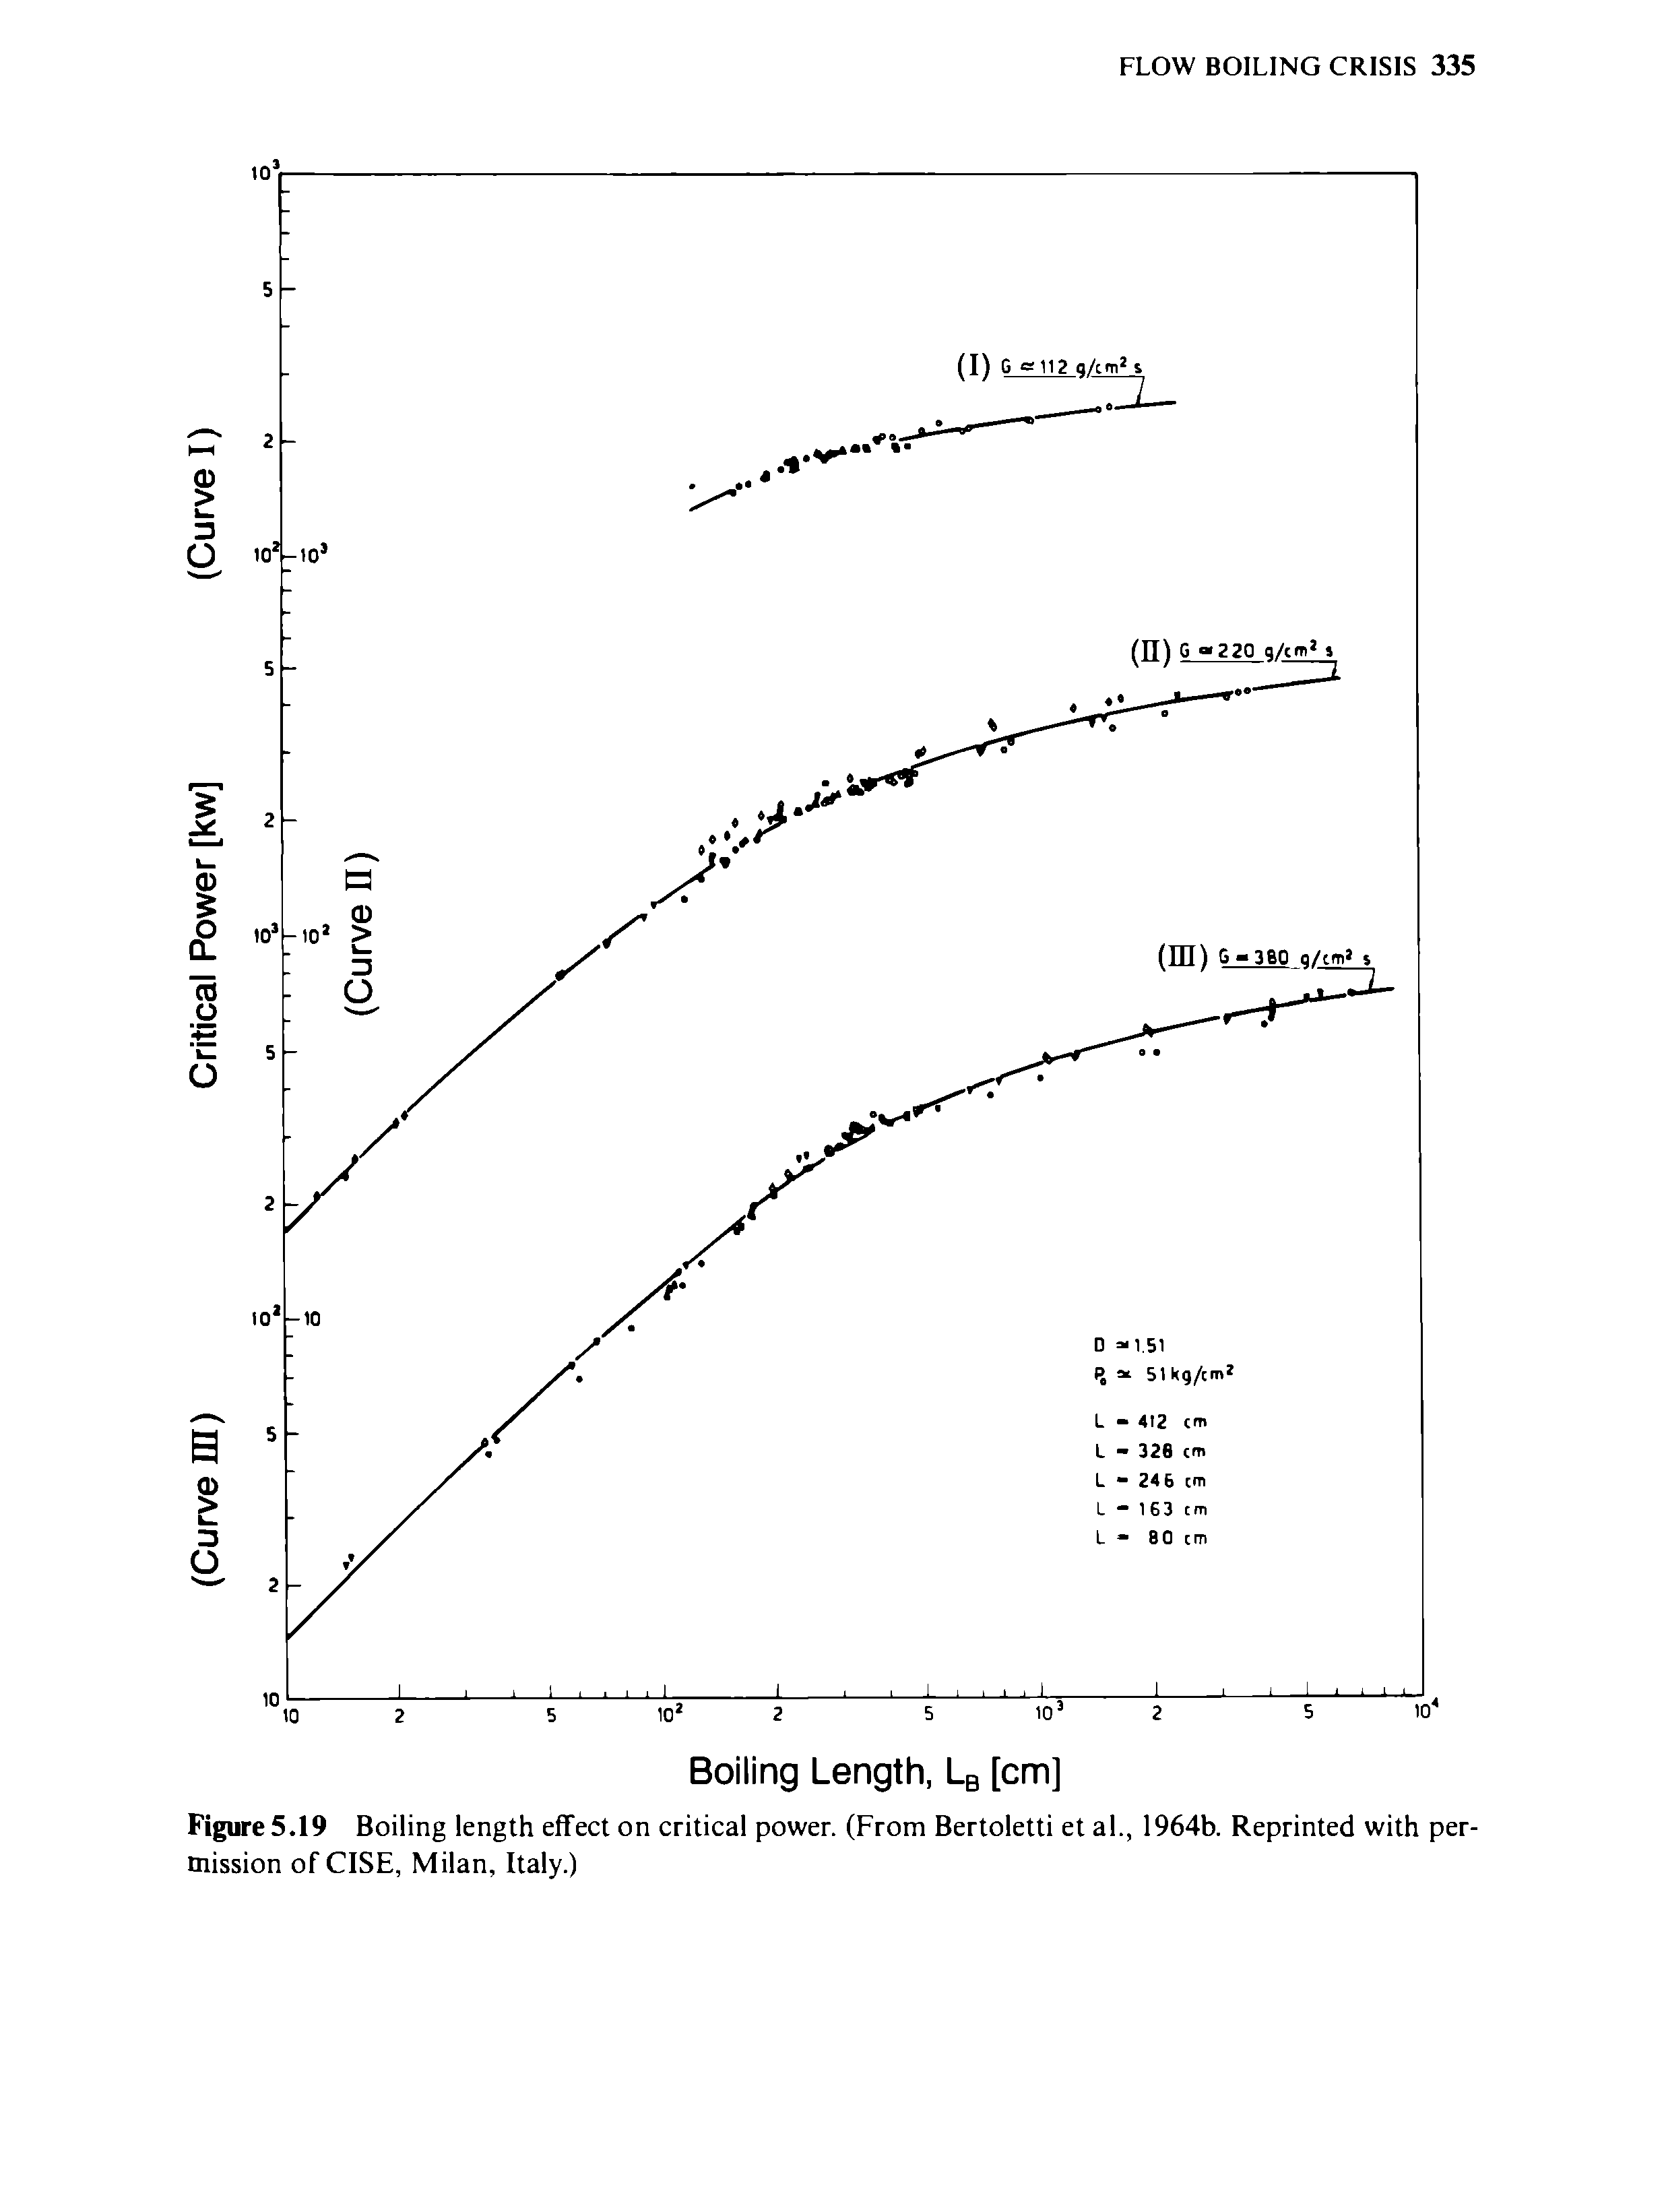 Figure 5.19 Boiling length effect on critical power. (From Bertoletti et al., 1964b. Reprinted with permission of CISE, Milan, Italy.)...